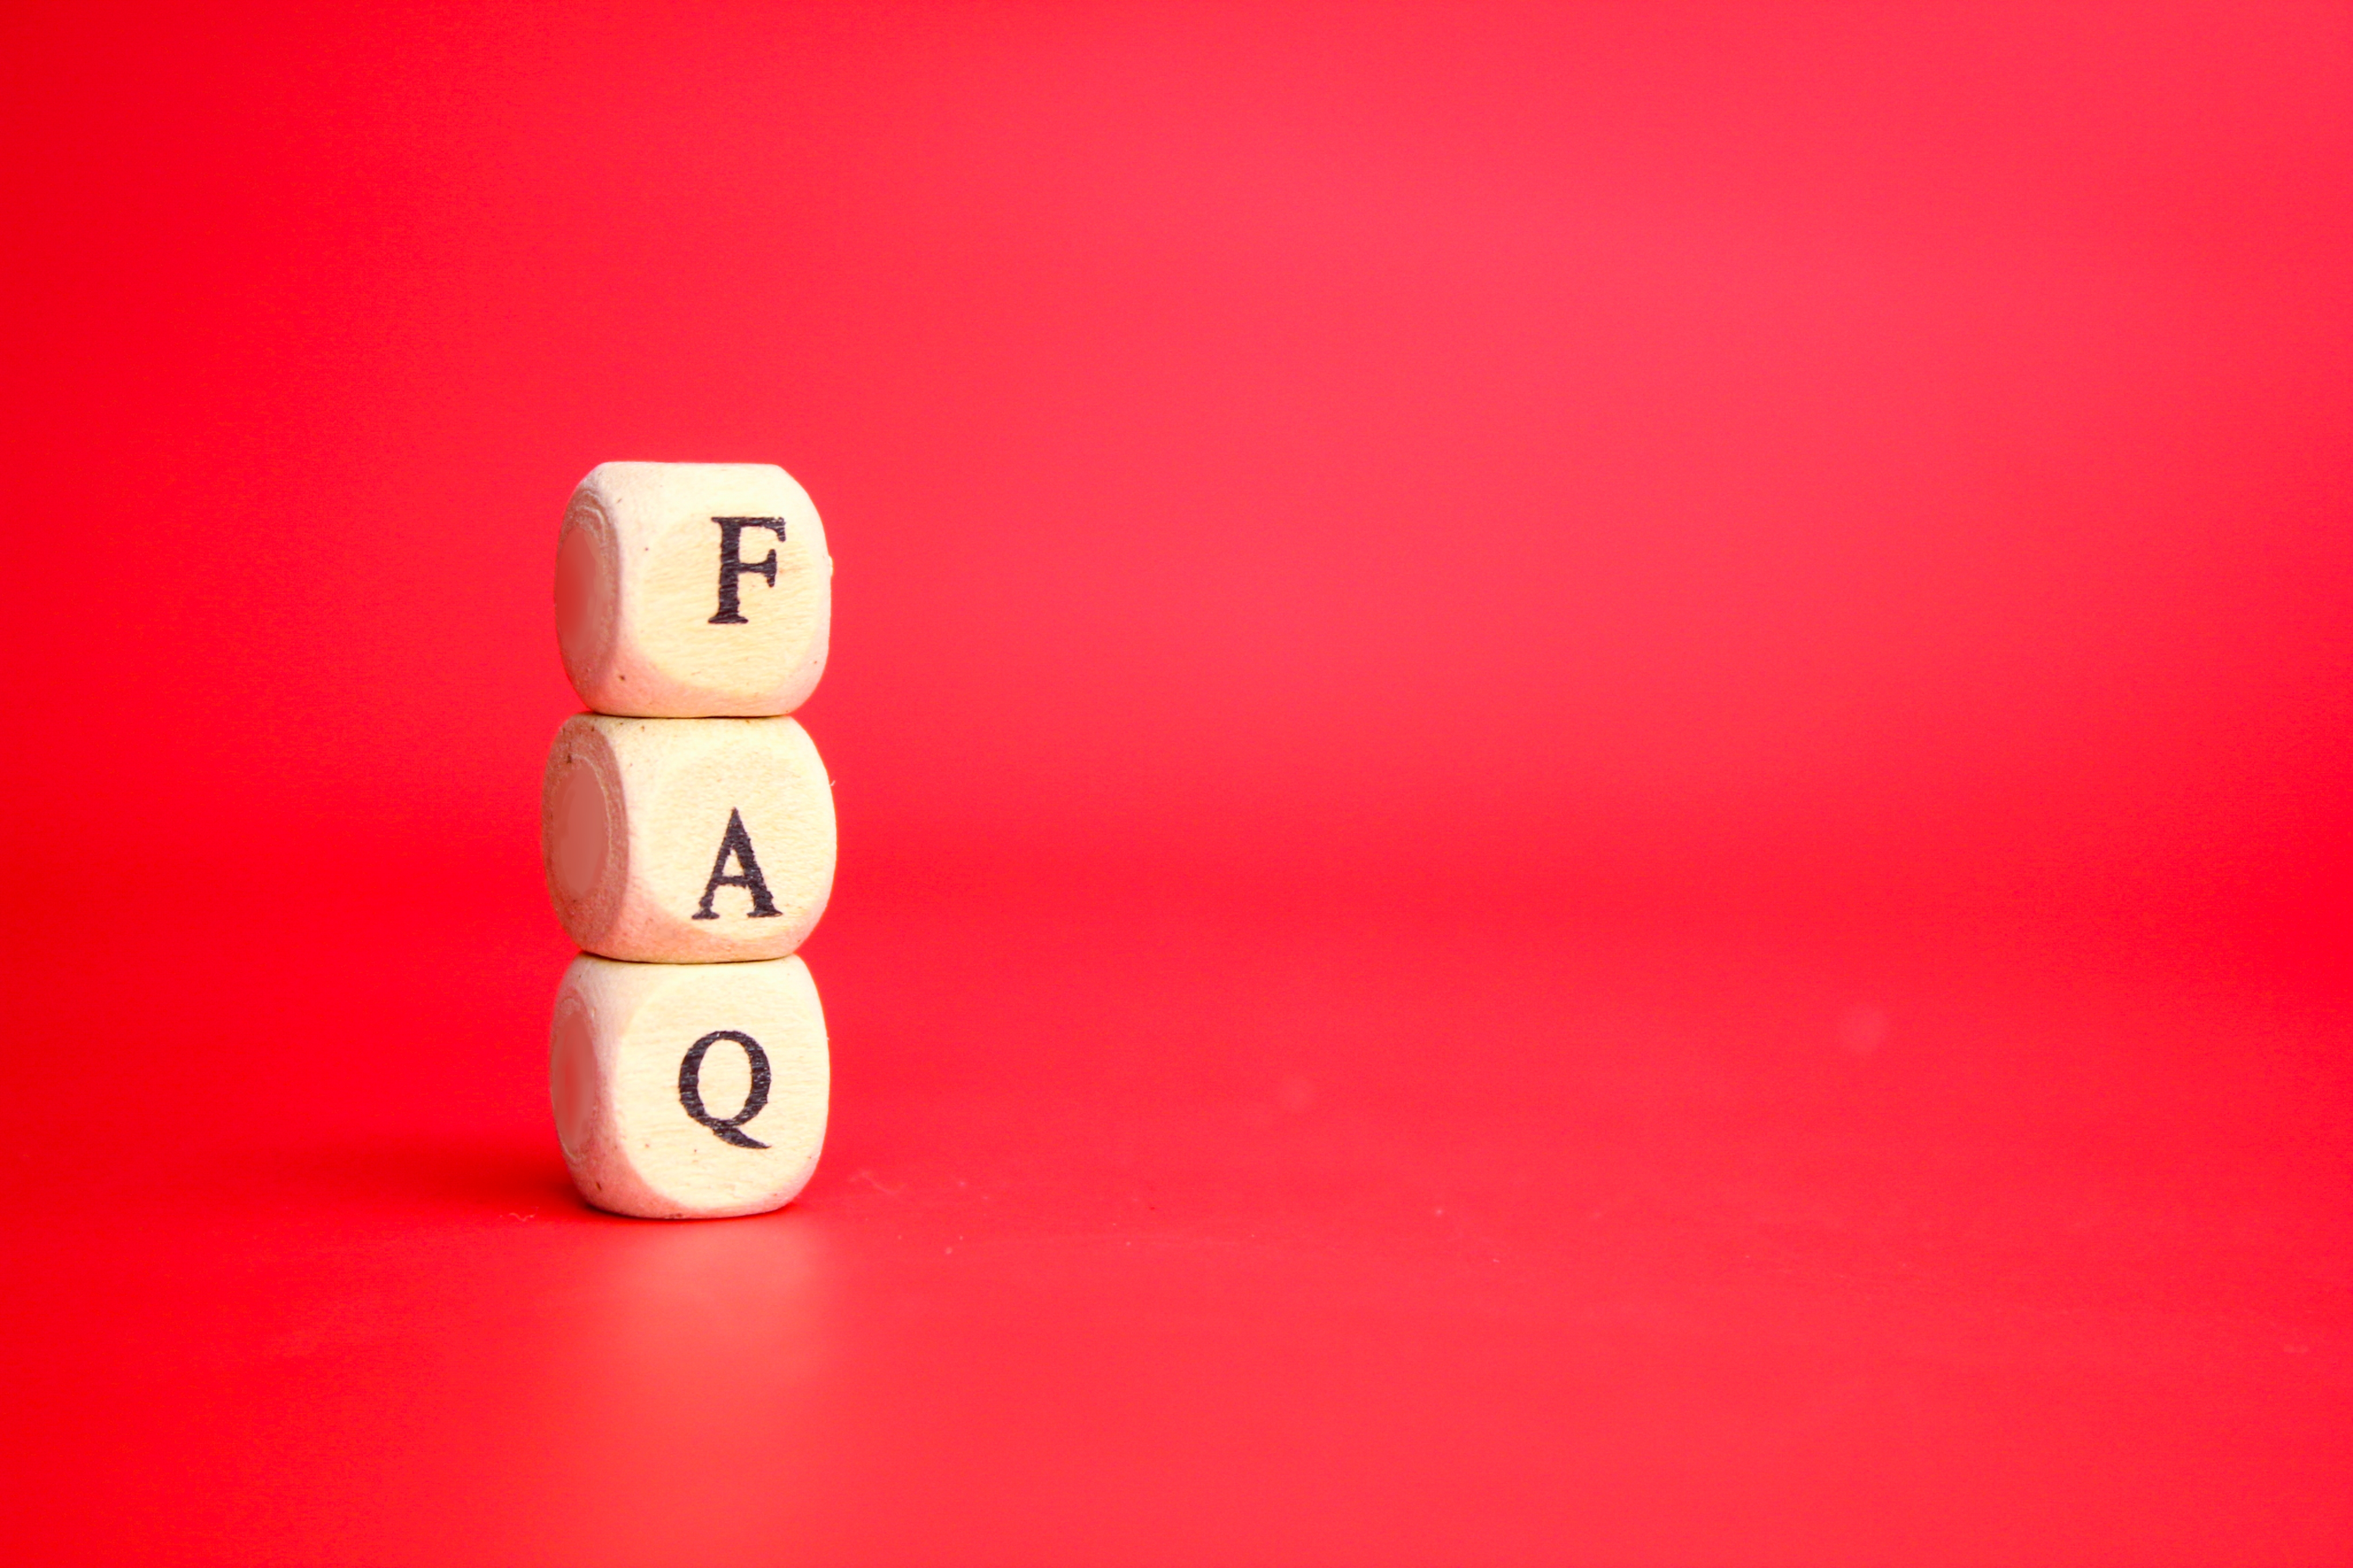  "Frequently Asked Questions (FAQs)"